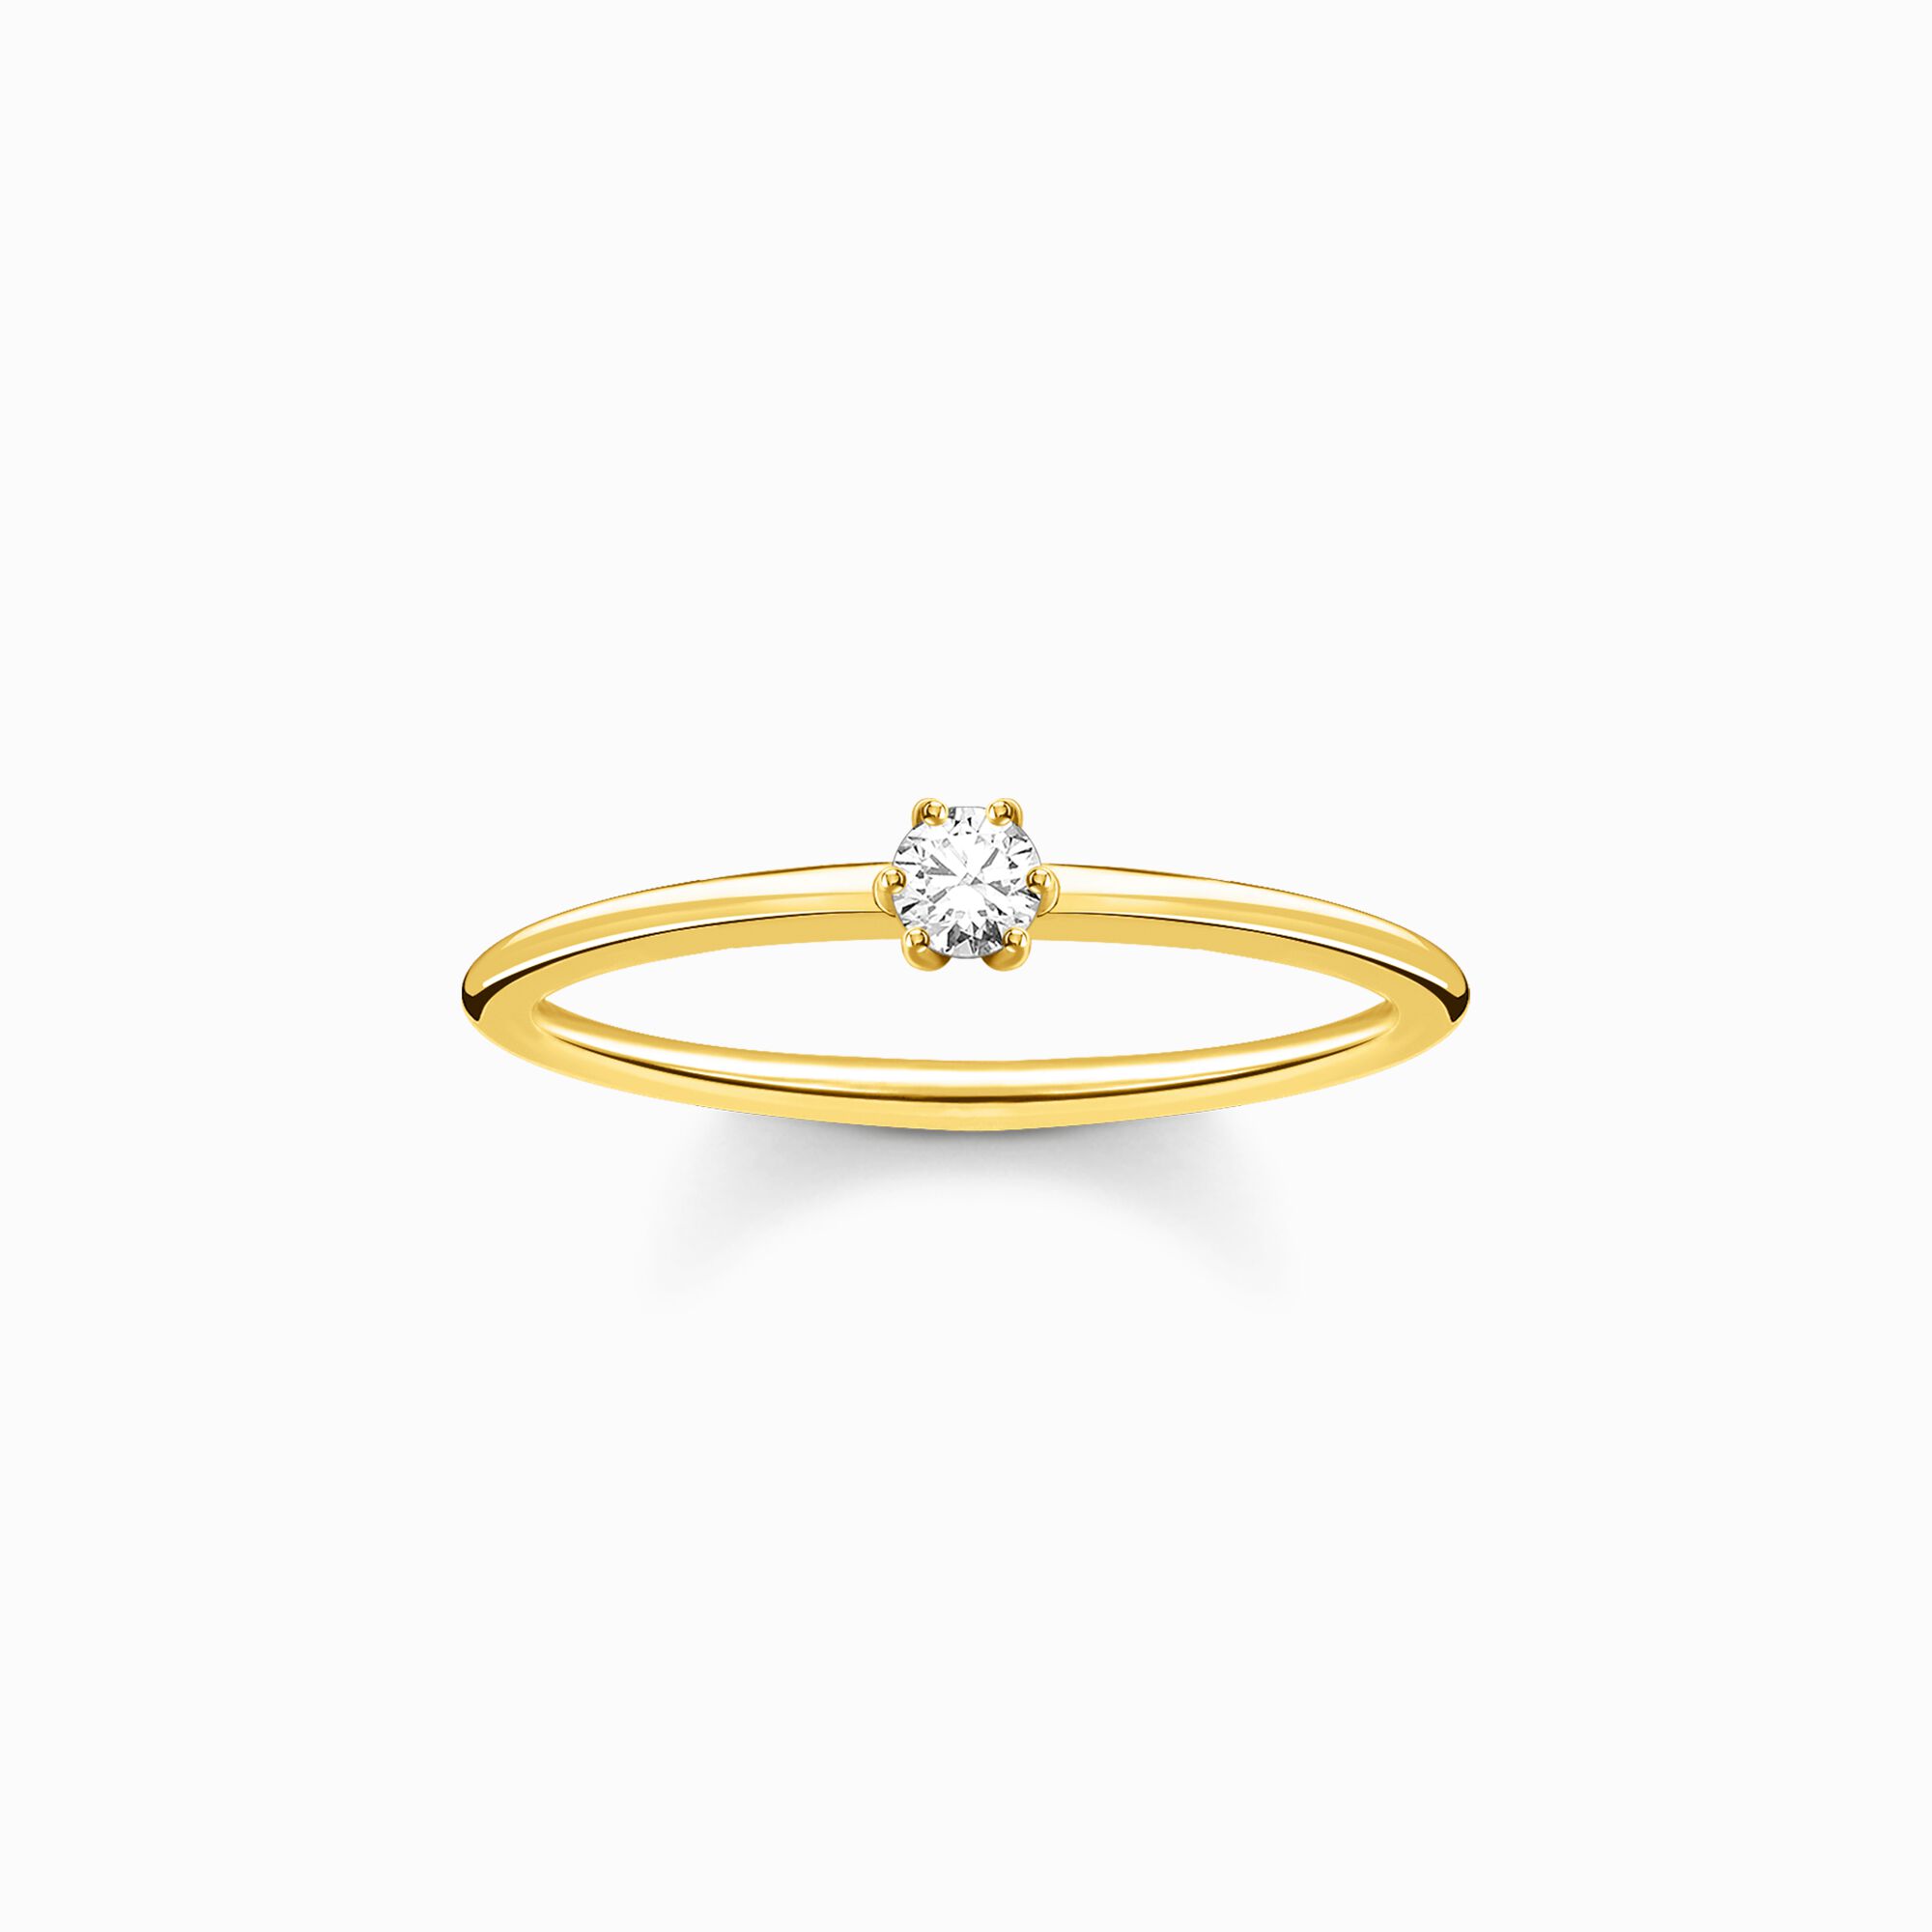 Ring white stone gold from the Charming Collection collection in the THOMAS SABO online store